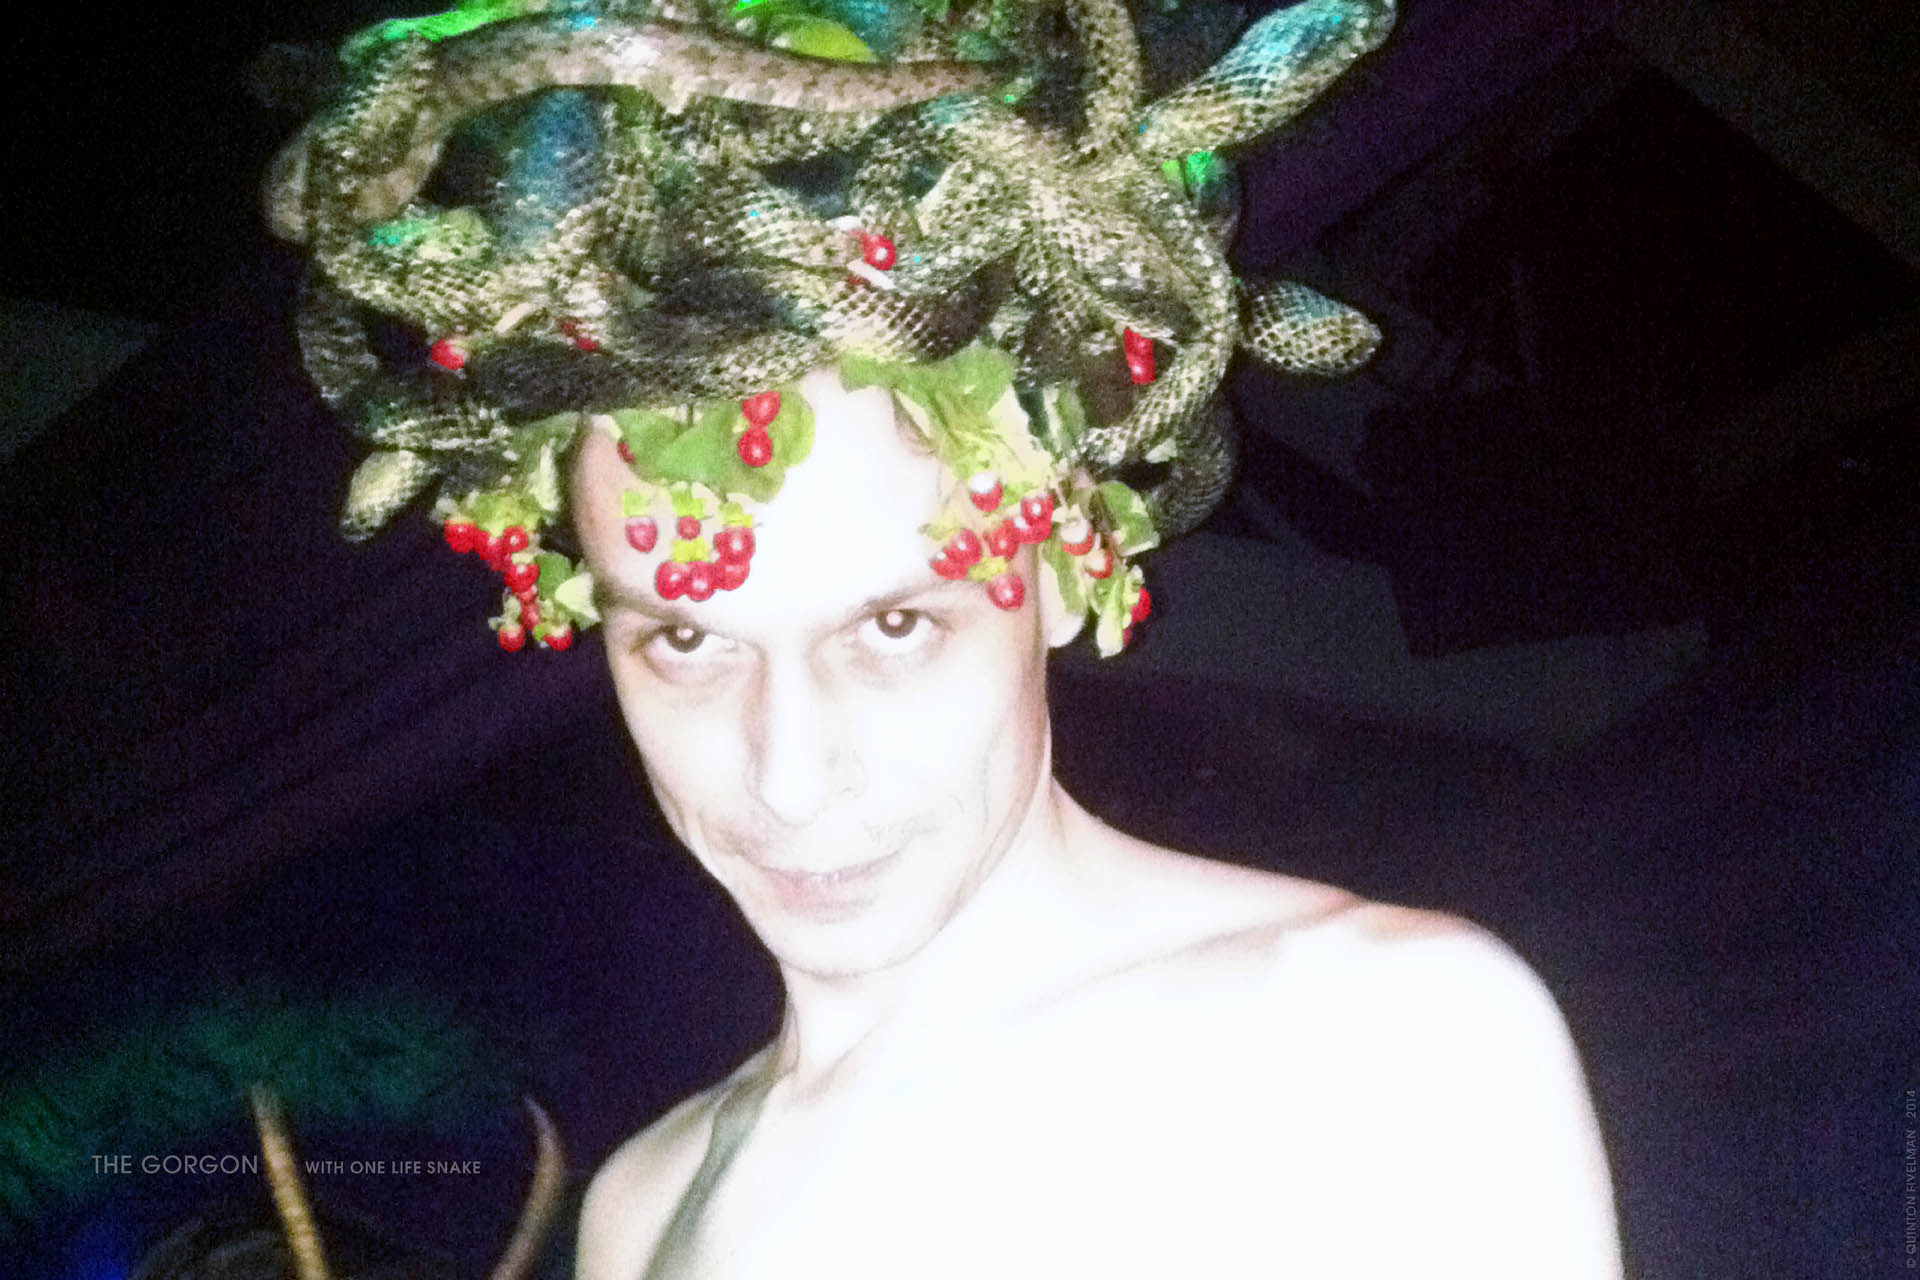 The Gorgon headpiece with real snake